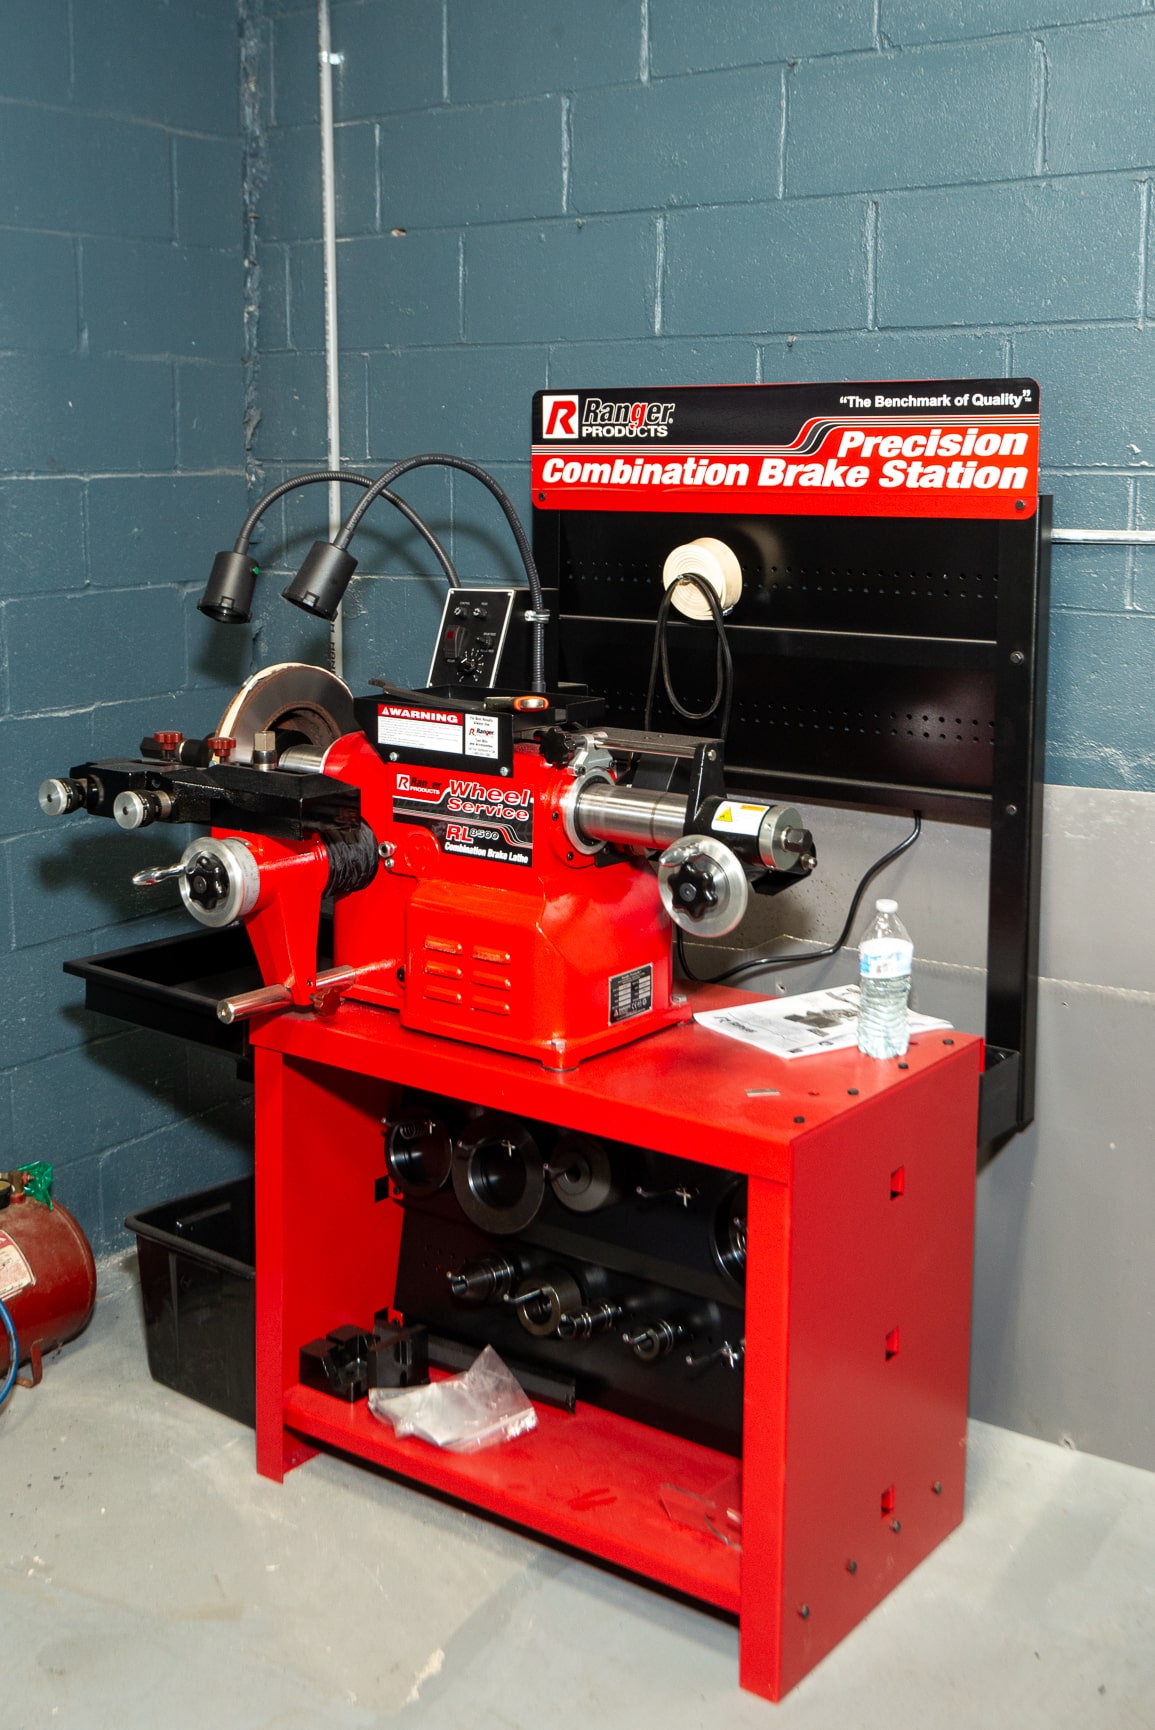 A red machine with various tools on it.